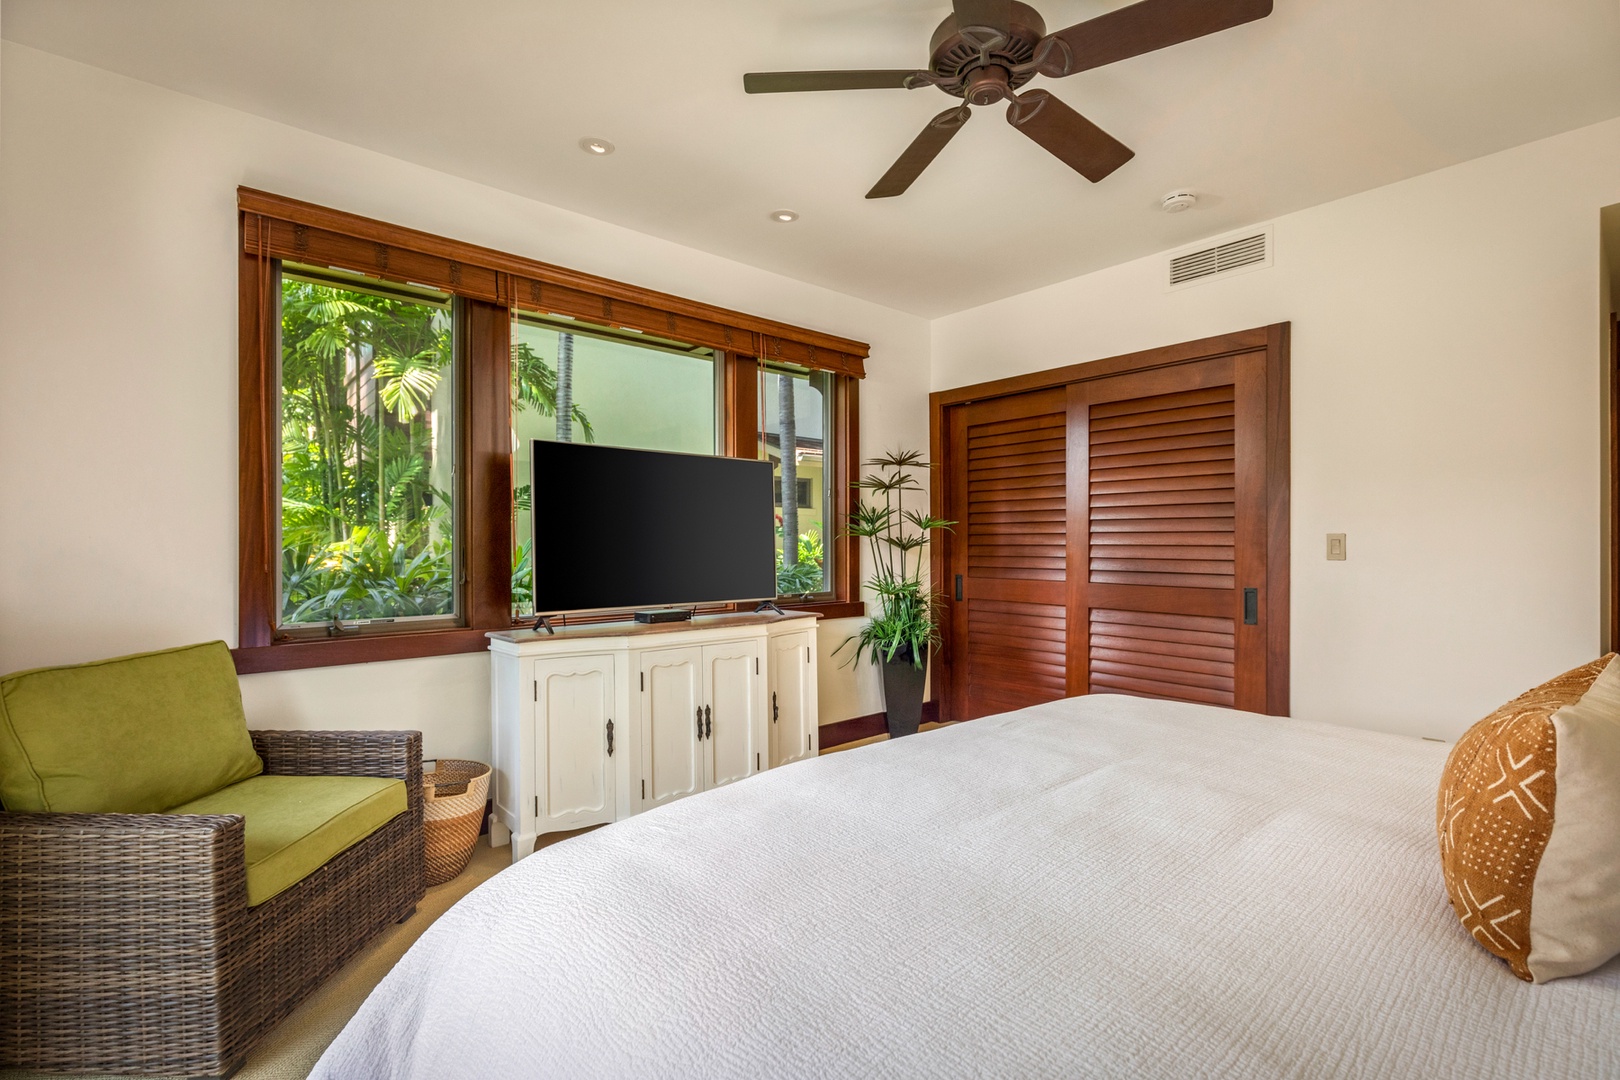 Kailua Kona Vacation Rentals, 3BD Hainoa Villa (2907C) at Four Seasons Resort at Hualalai - Second guest bedroom with two twin beds (can be converted to a king upon request), flat screen TV, outdoor access and ensuite full bath.